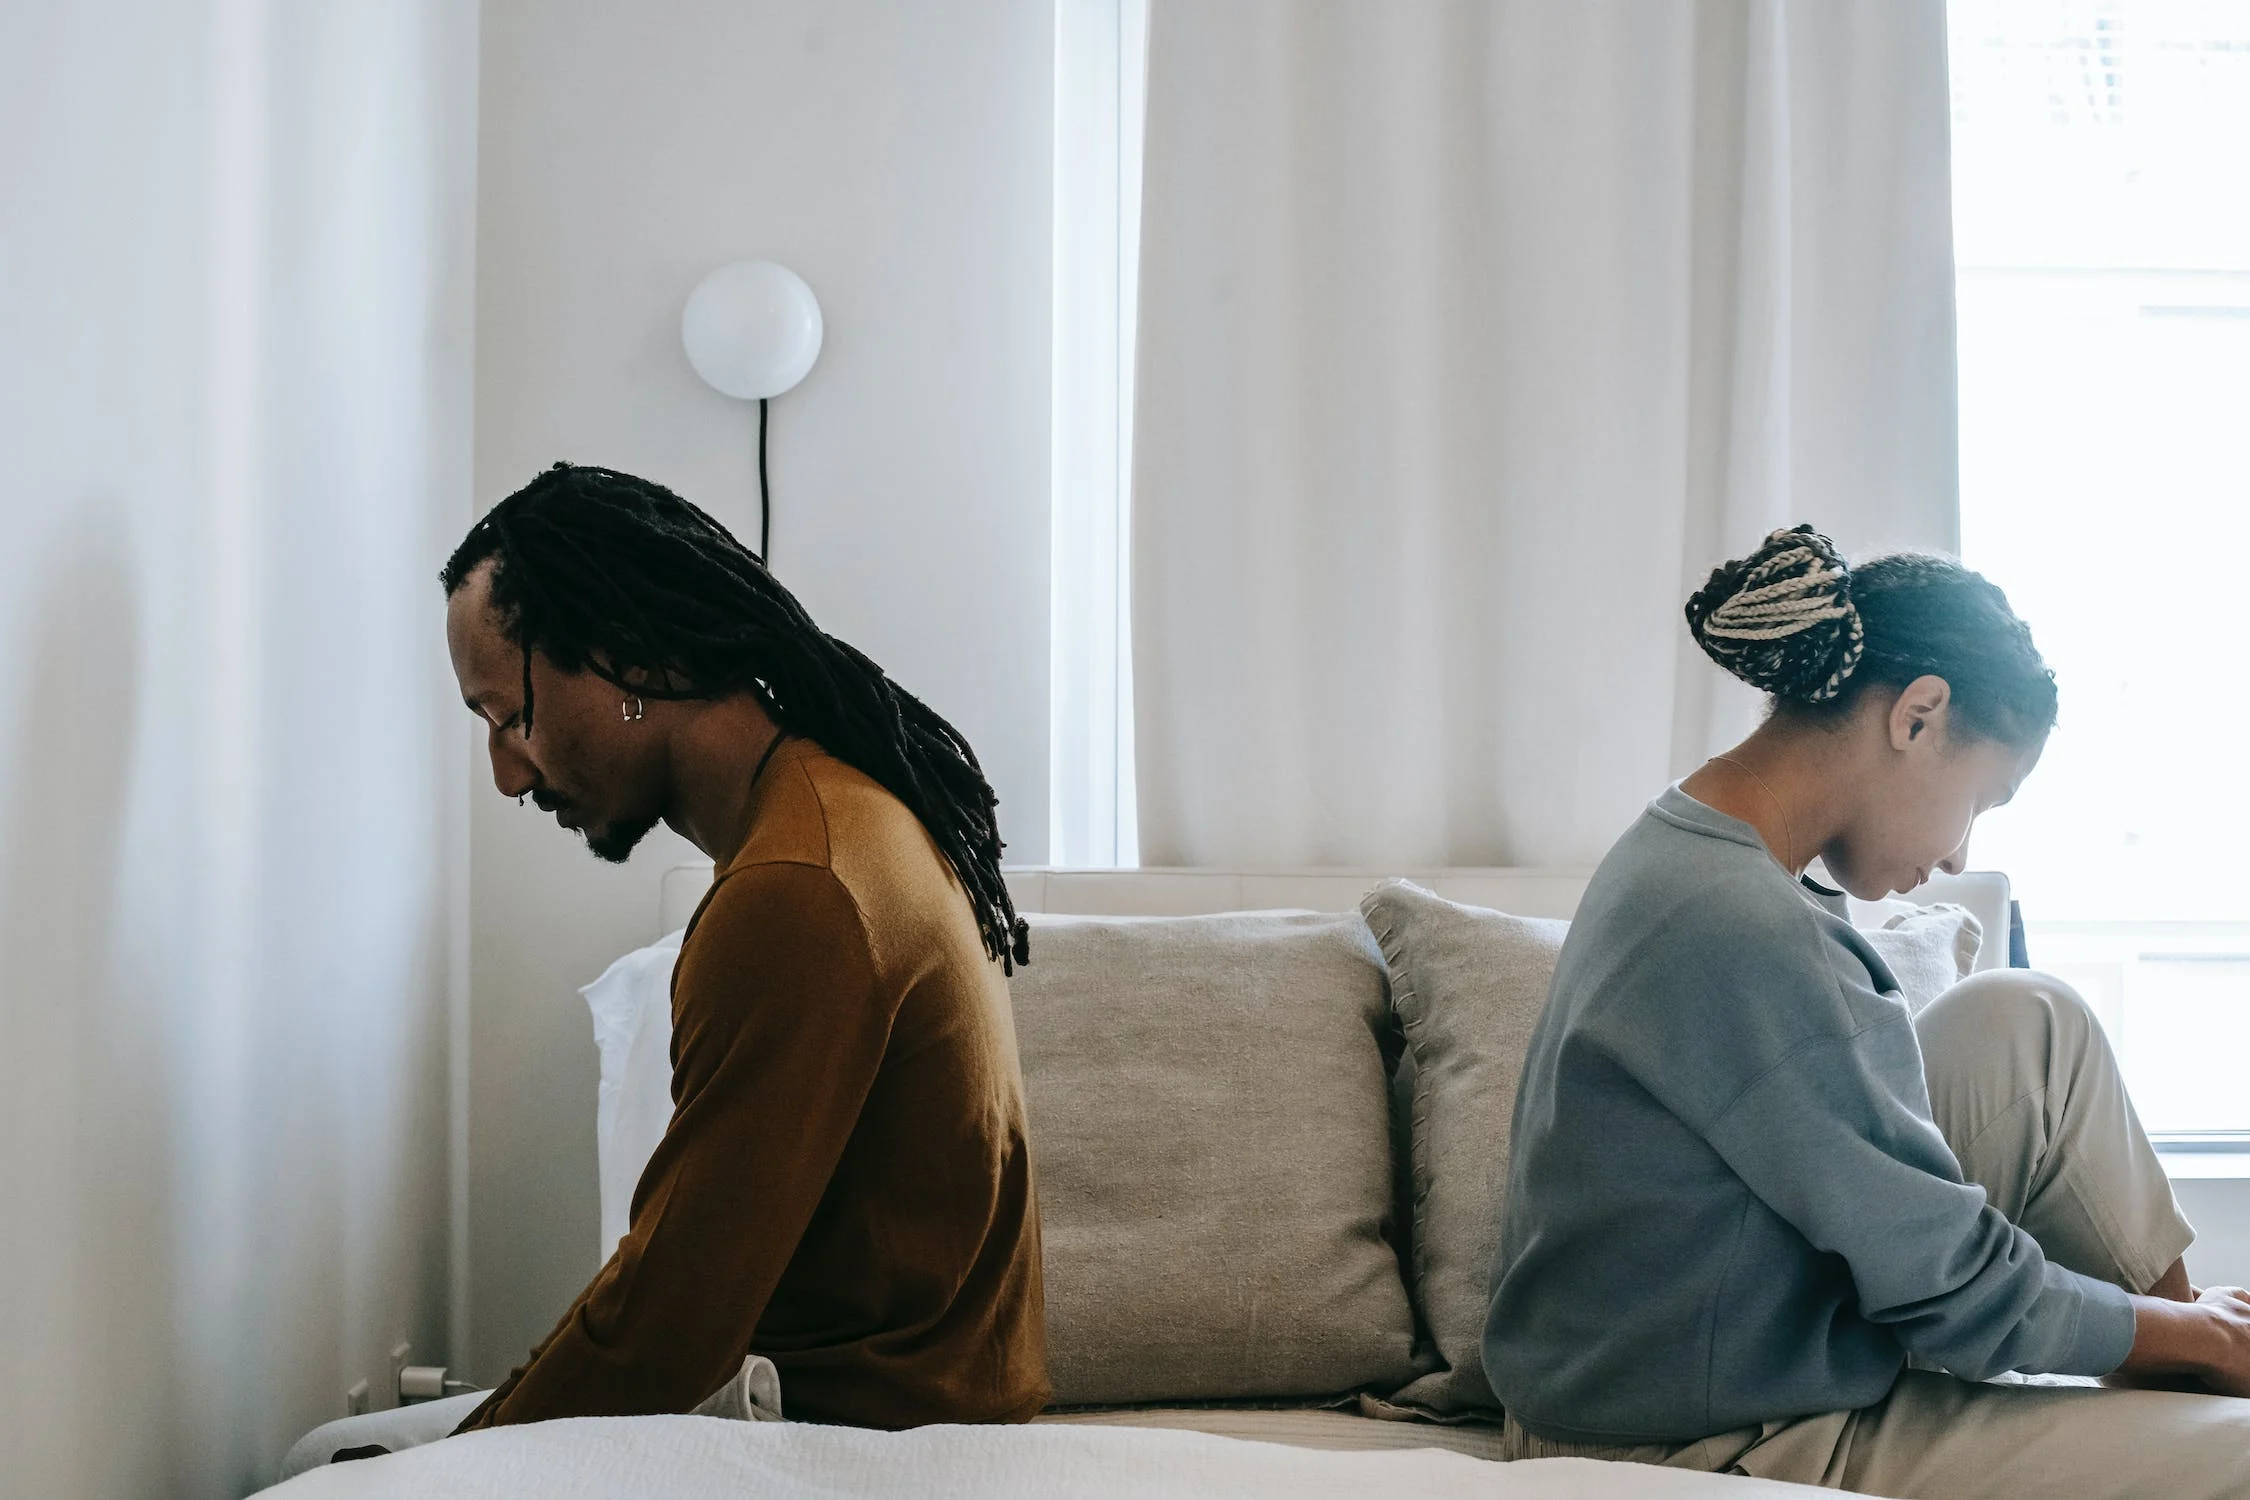 A troubled African American couple sits on a bed, their expressions reflecting confusion and misunderstanding, as they grapple with an emotional moment in their relationship.